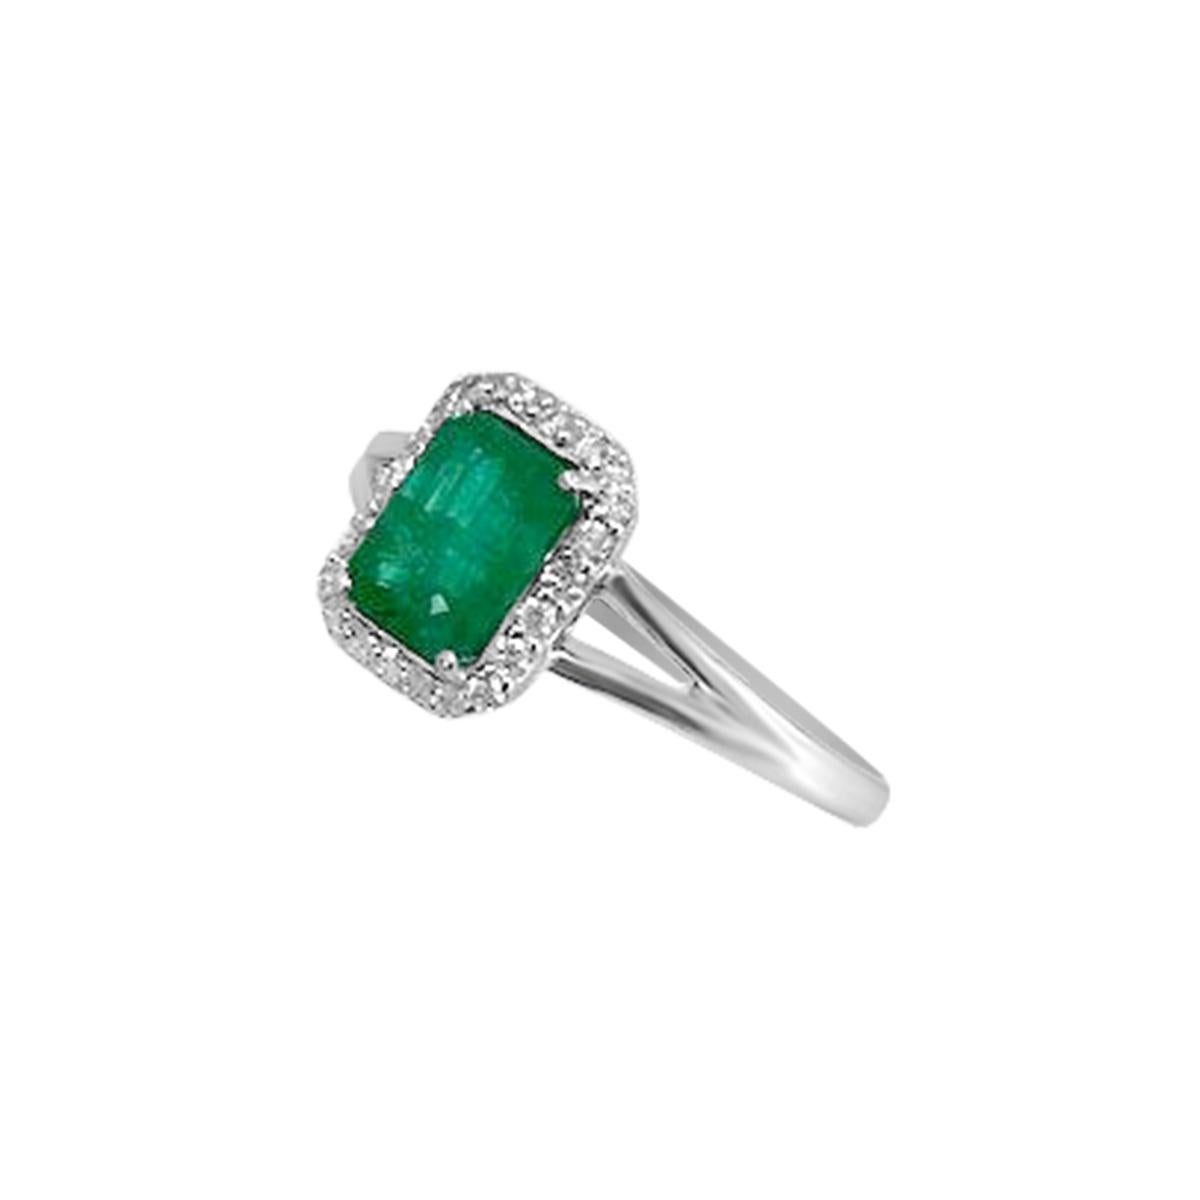 This Luxurious Ring Is Designed With 14K White Gold Set With An Octagon Cut Emerald And Round Diamonds That Will Brighten Your Day.
The Clean Split Band Of This Ring Makes This Ring Look More Beautiful And Elegant.


Style# TS1117R
Emerald : Octagon